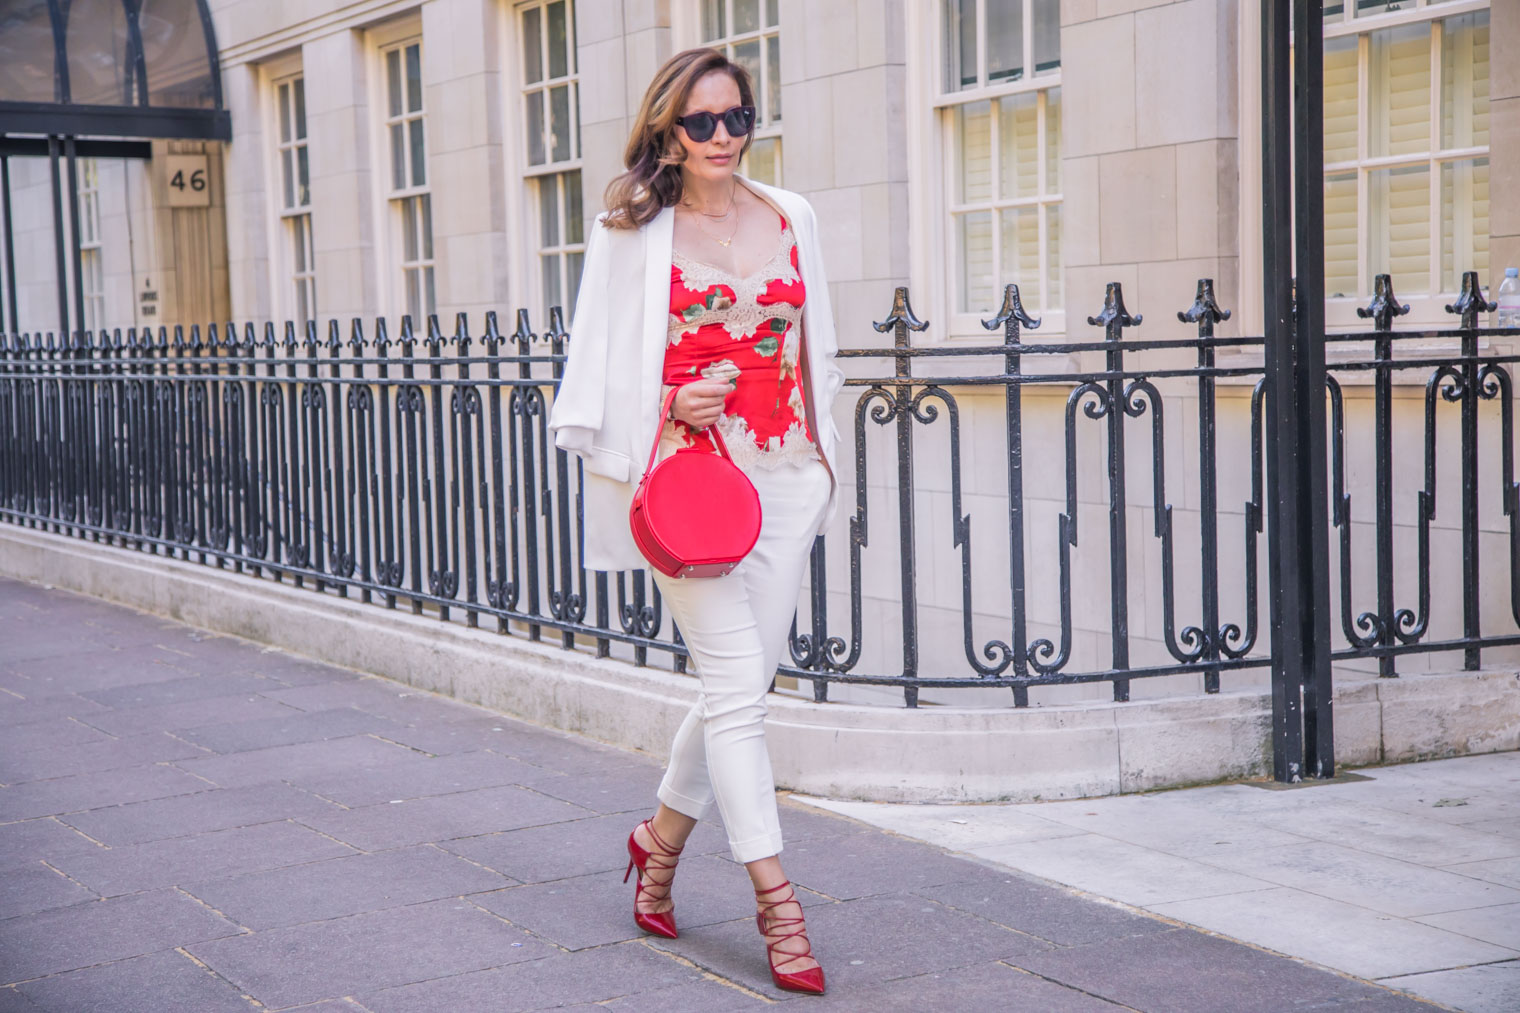 How to dress up white trousers with lace Dolce & Gabbana top